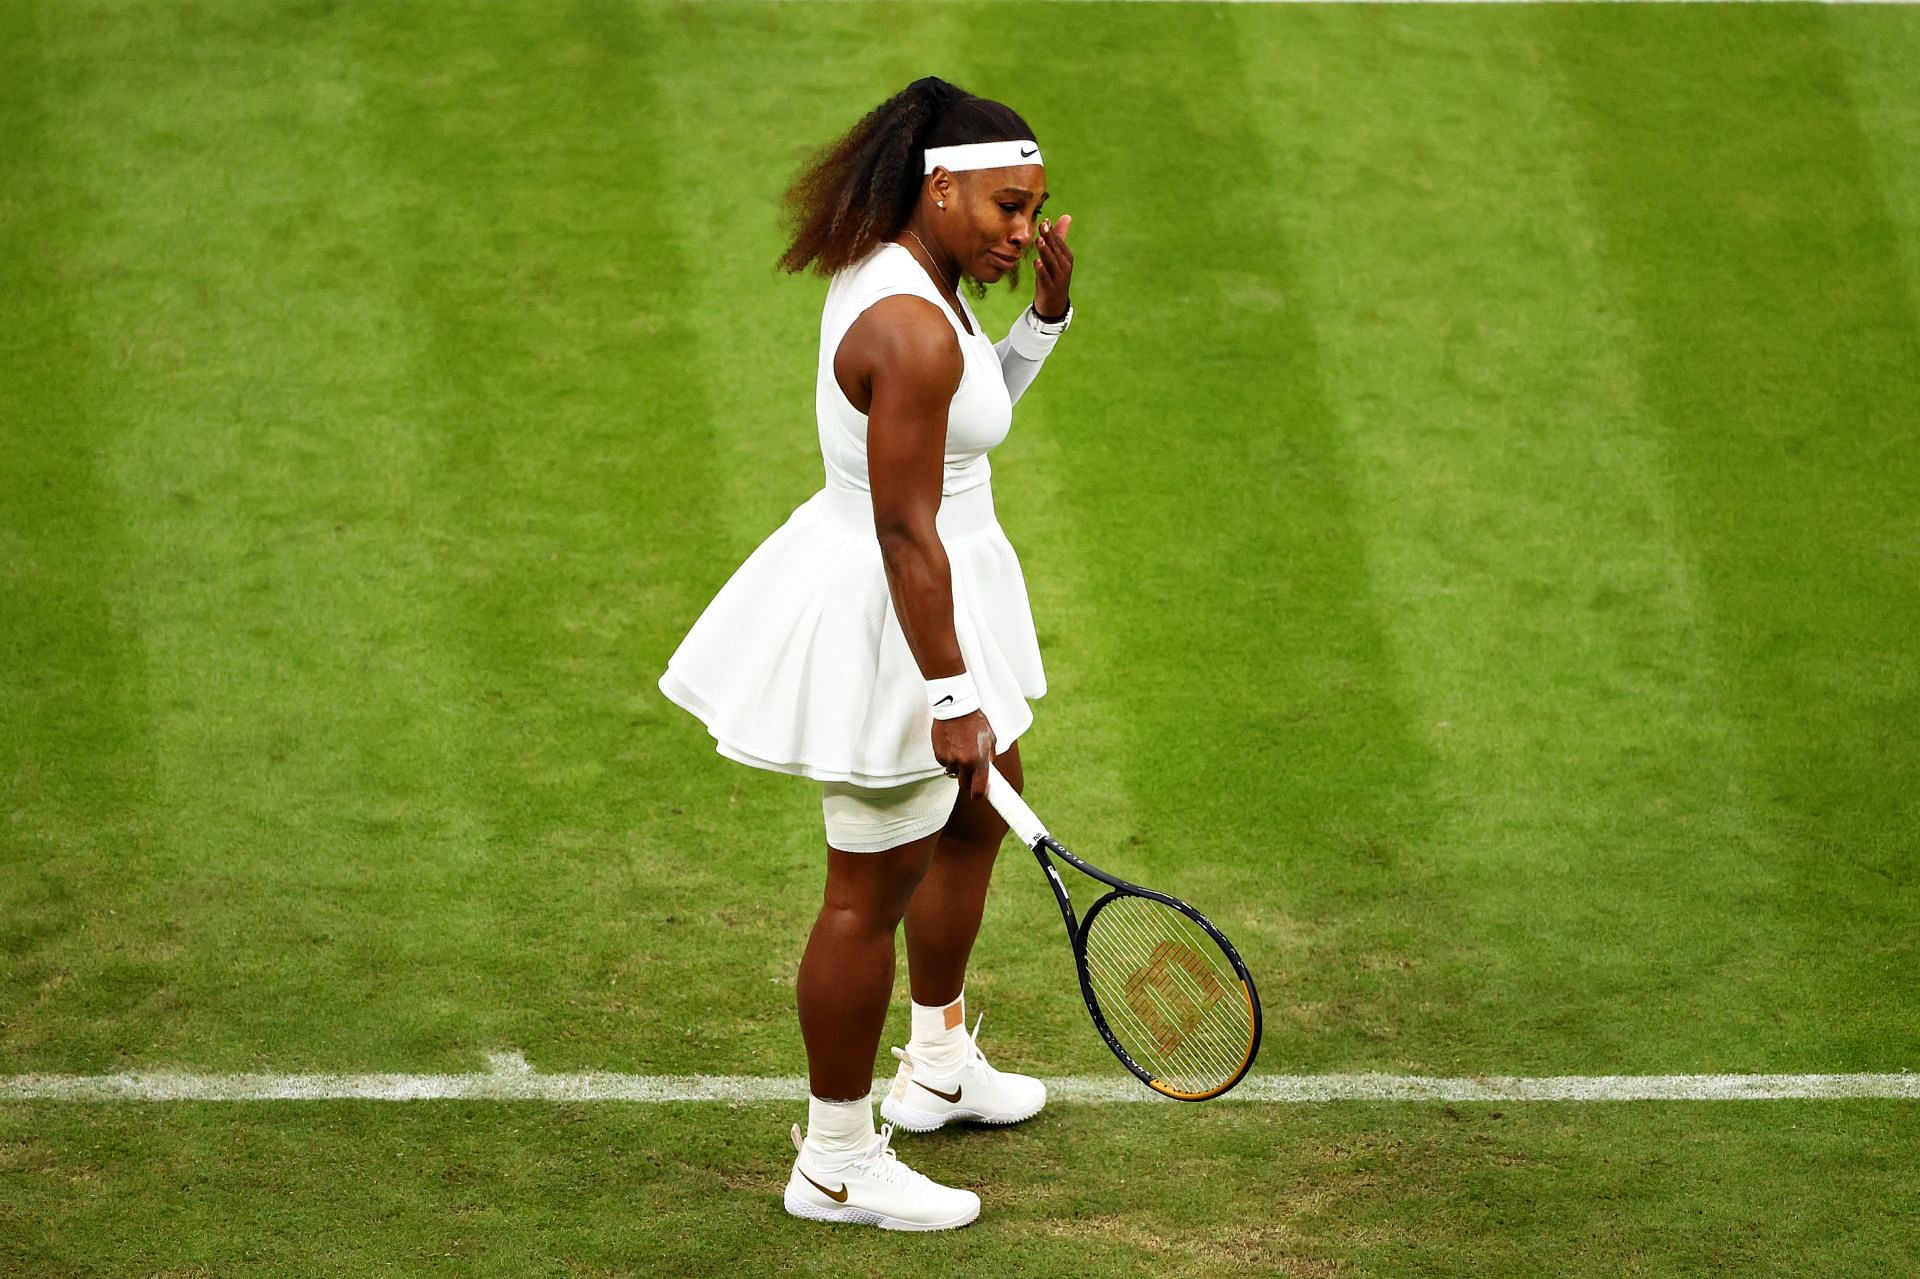 Serena Williams&#039; last match was at the 2021 Wimbledon where she retired in the opening round.